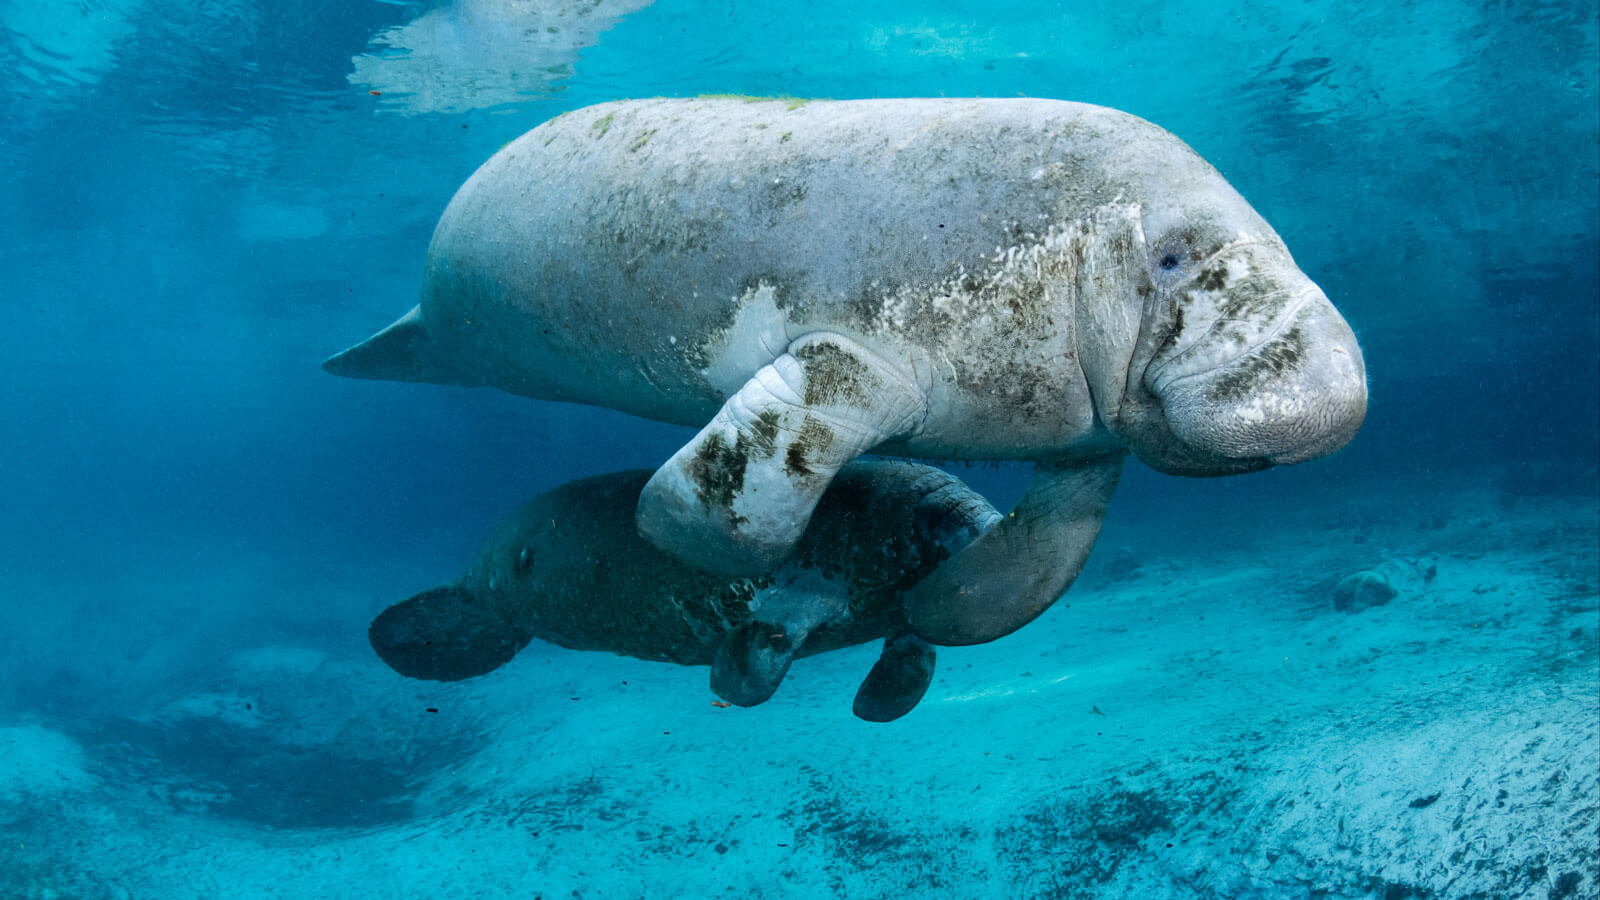 Two Manatees